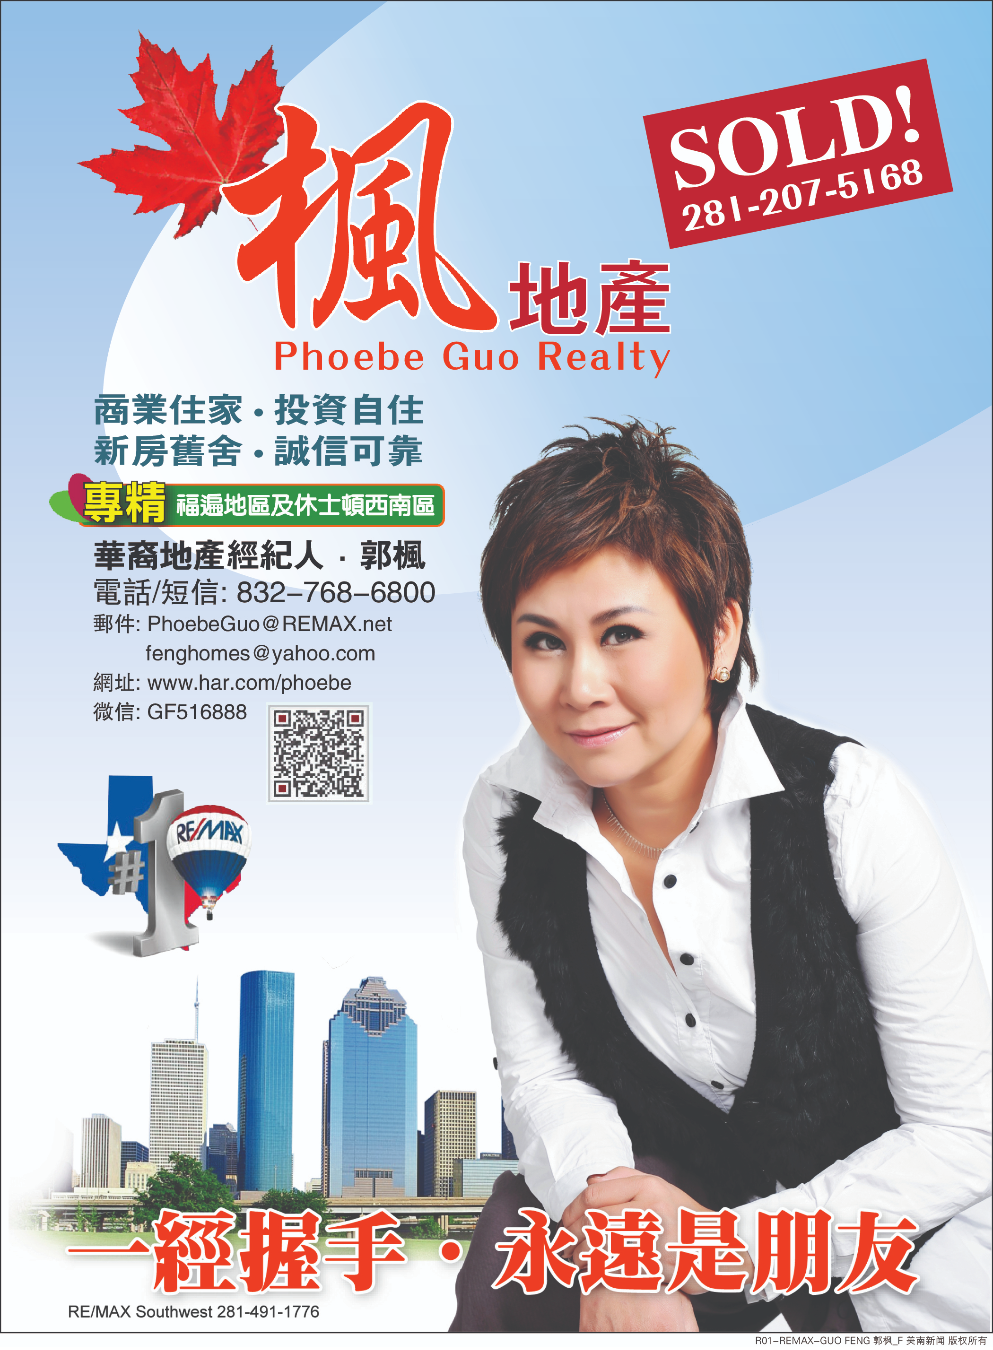 RE/MAX- Phoebe Guo Realty 郭枫地產